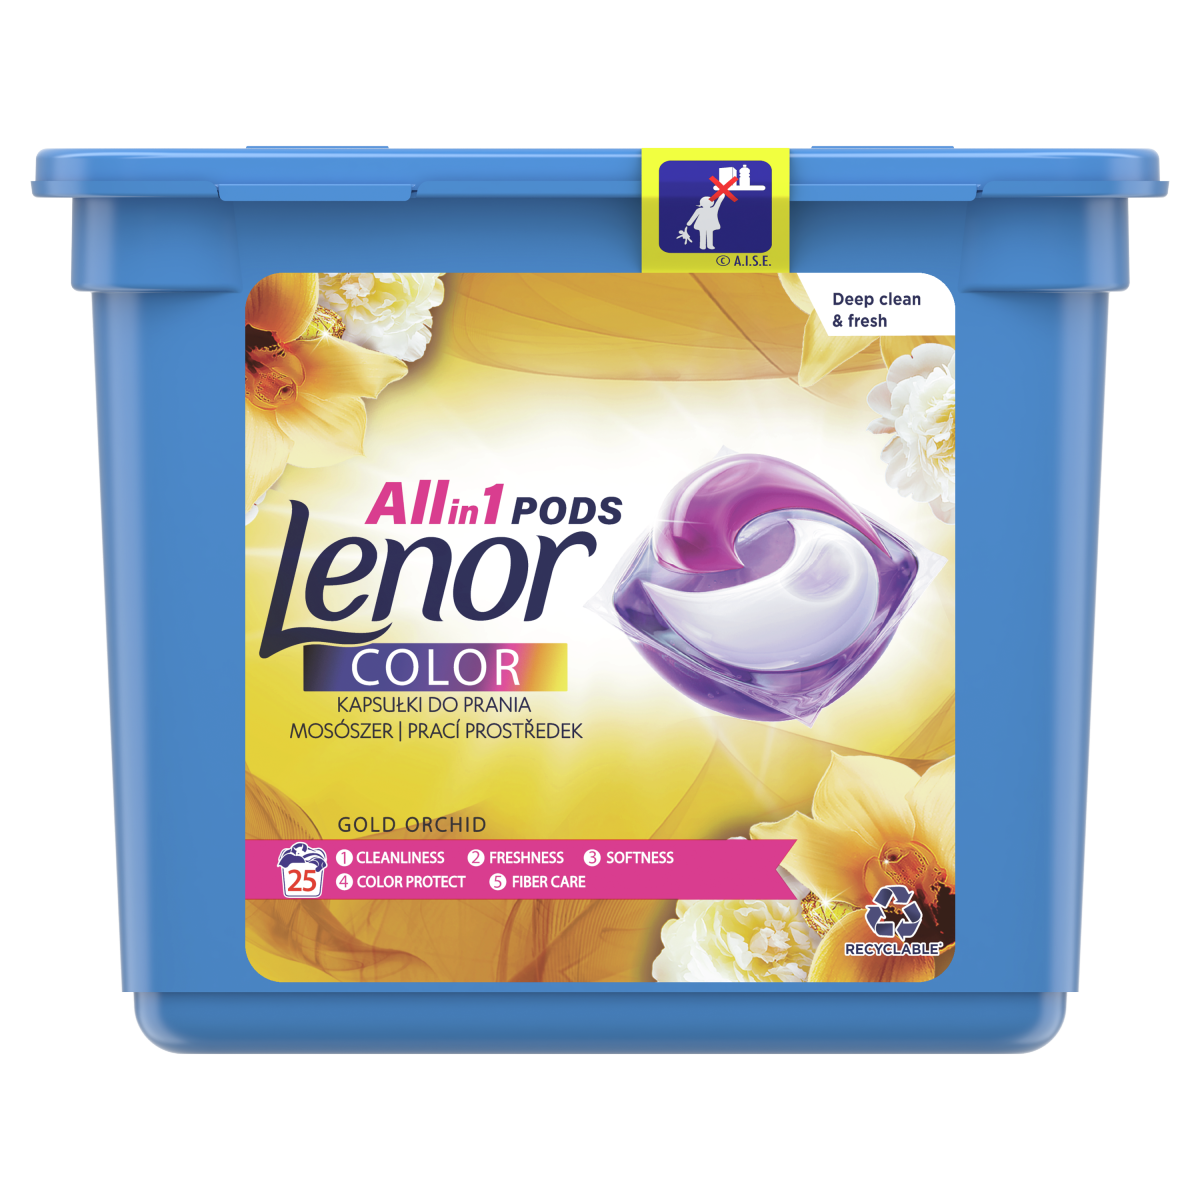 DETERGENT LENOR CAPSULE ALL IN 1 COLOR GOLD ORCHID 25*25.1G 627.5G